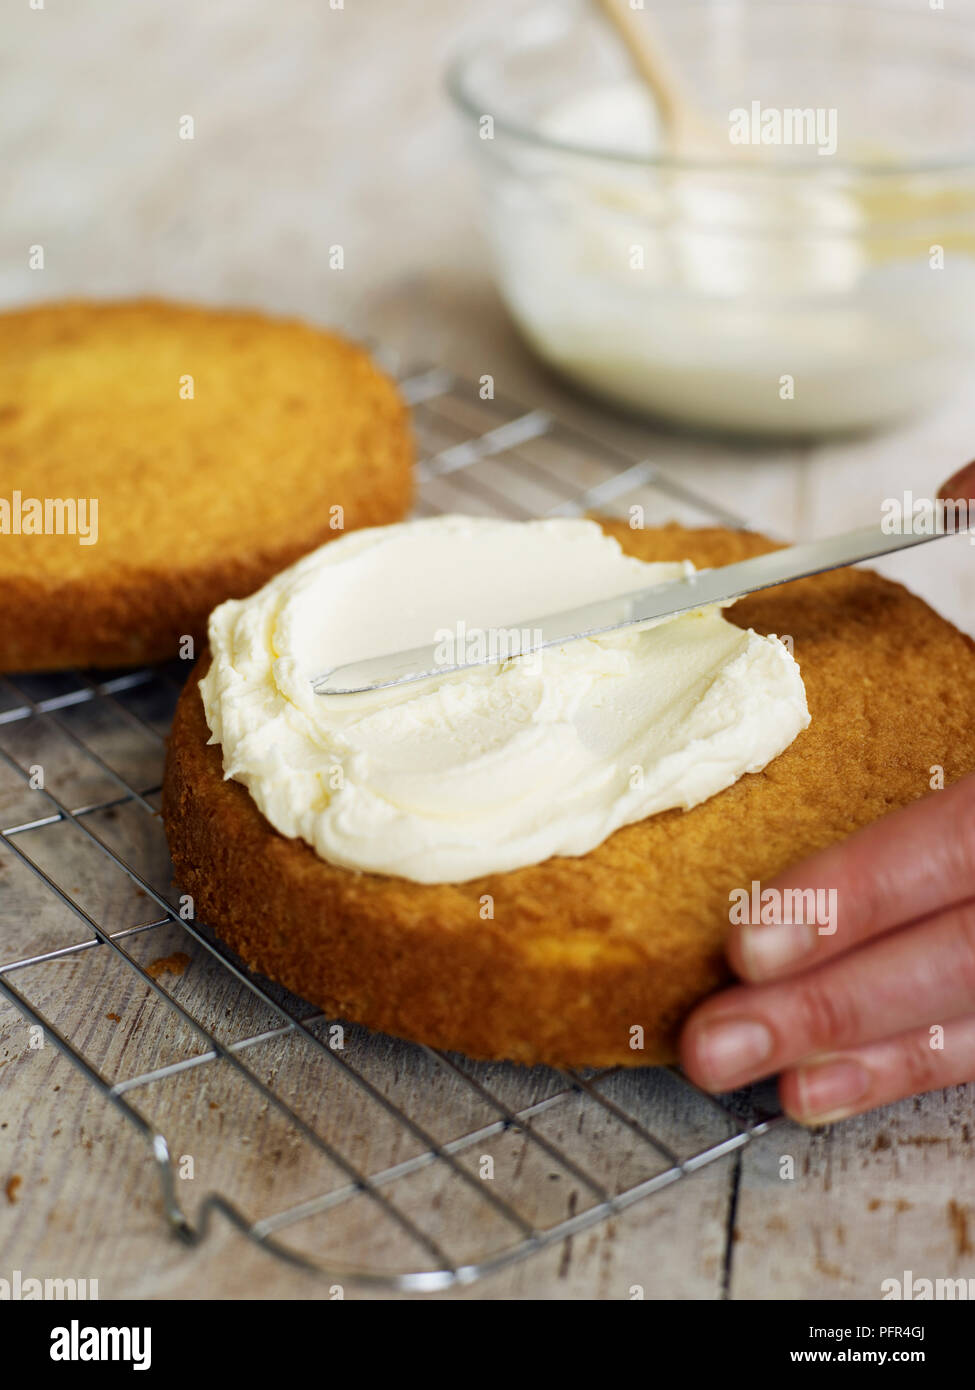 Spreading butter icing on Victoria sponge cake Stock Photo